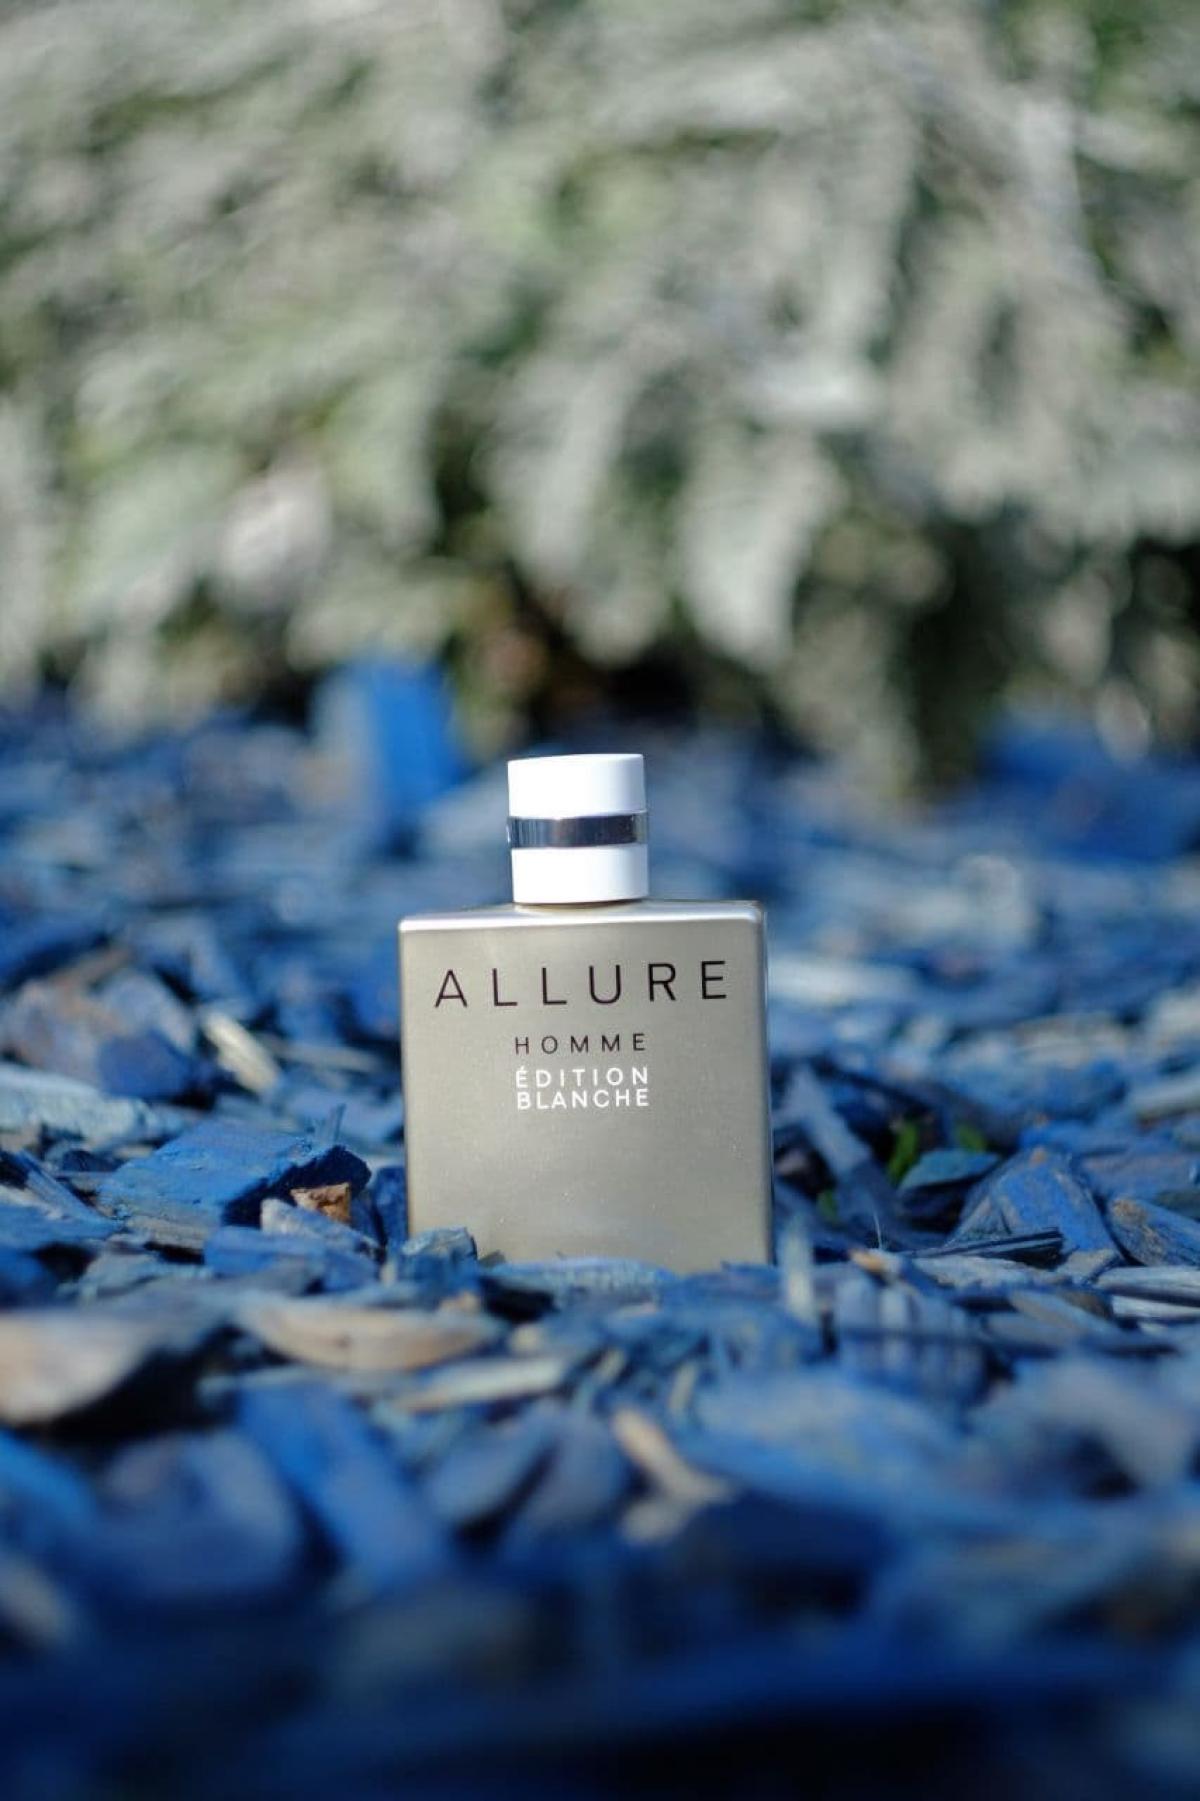 Chanel homme edition blanche. Chanel Allure homme Edition Blanche. Chanel мужские. Allure homme Edition Blanche. Парфюм Allure homme Edition Blanche Chanel.